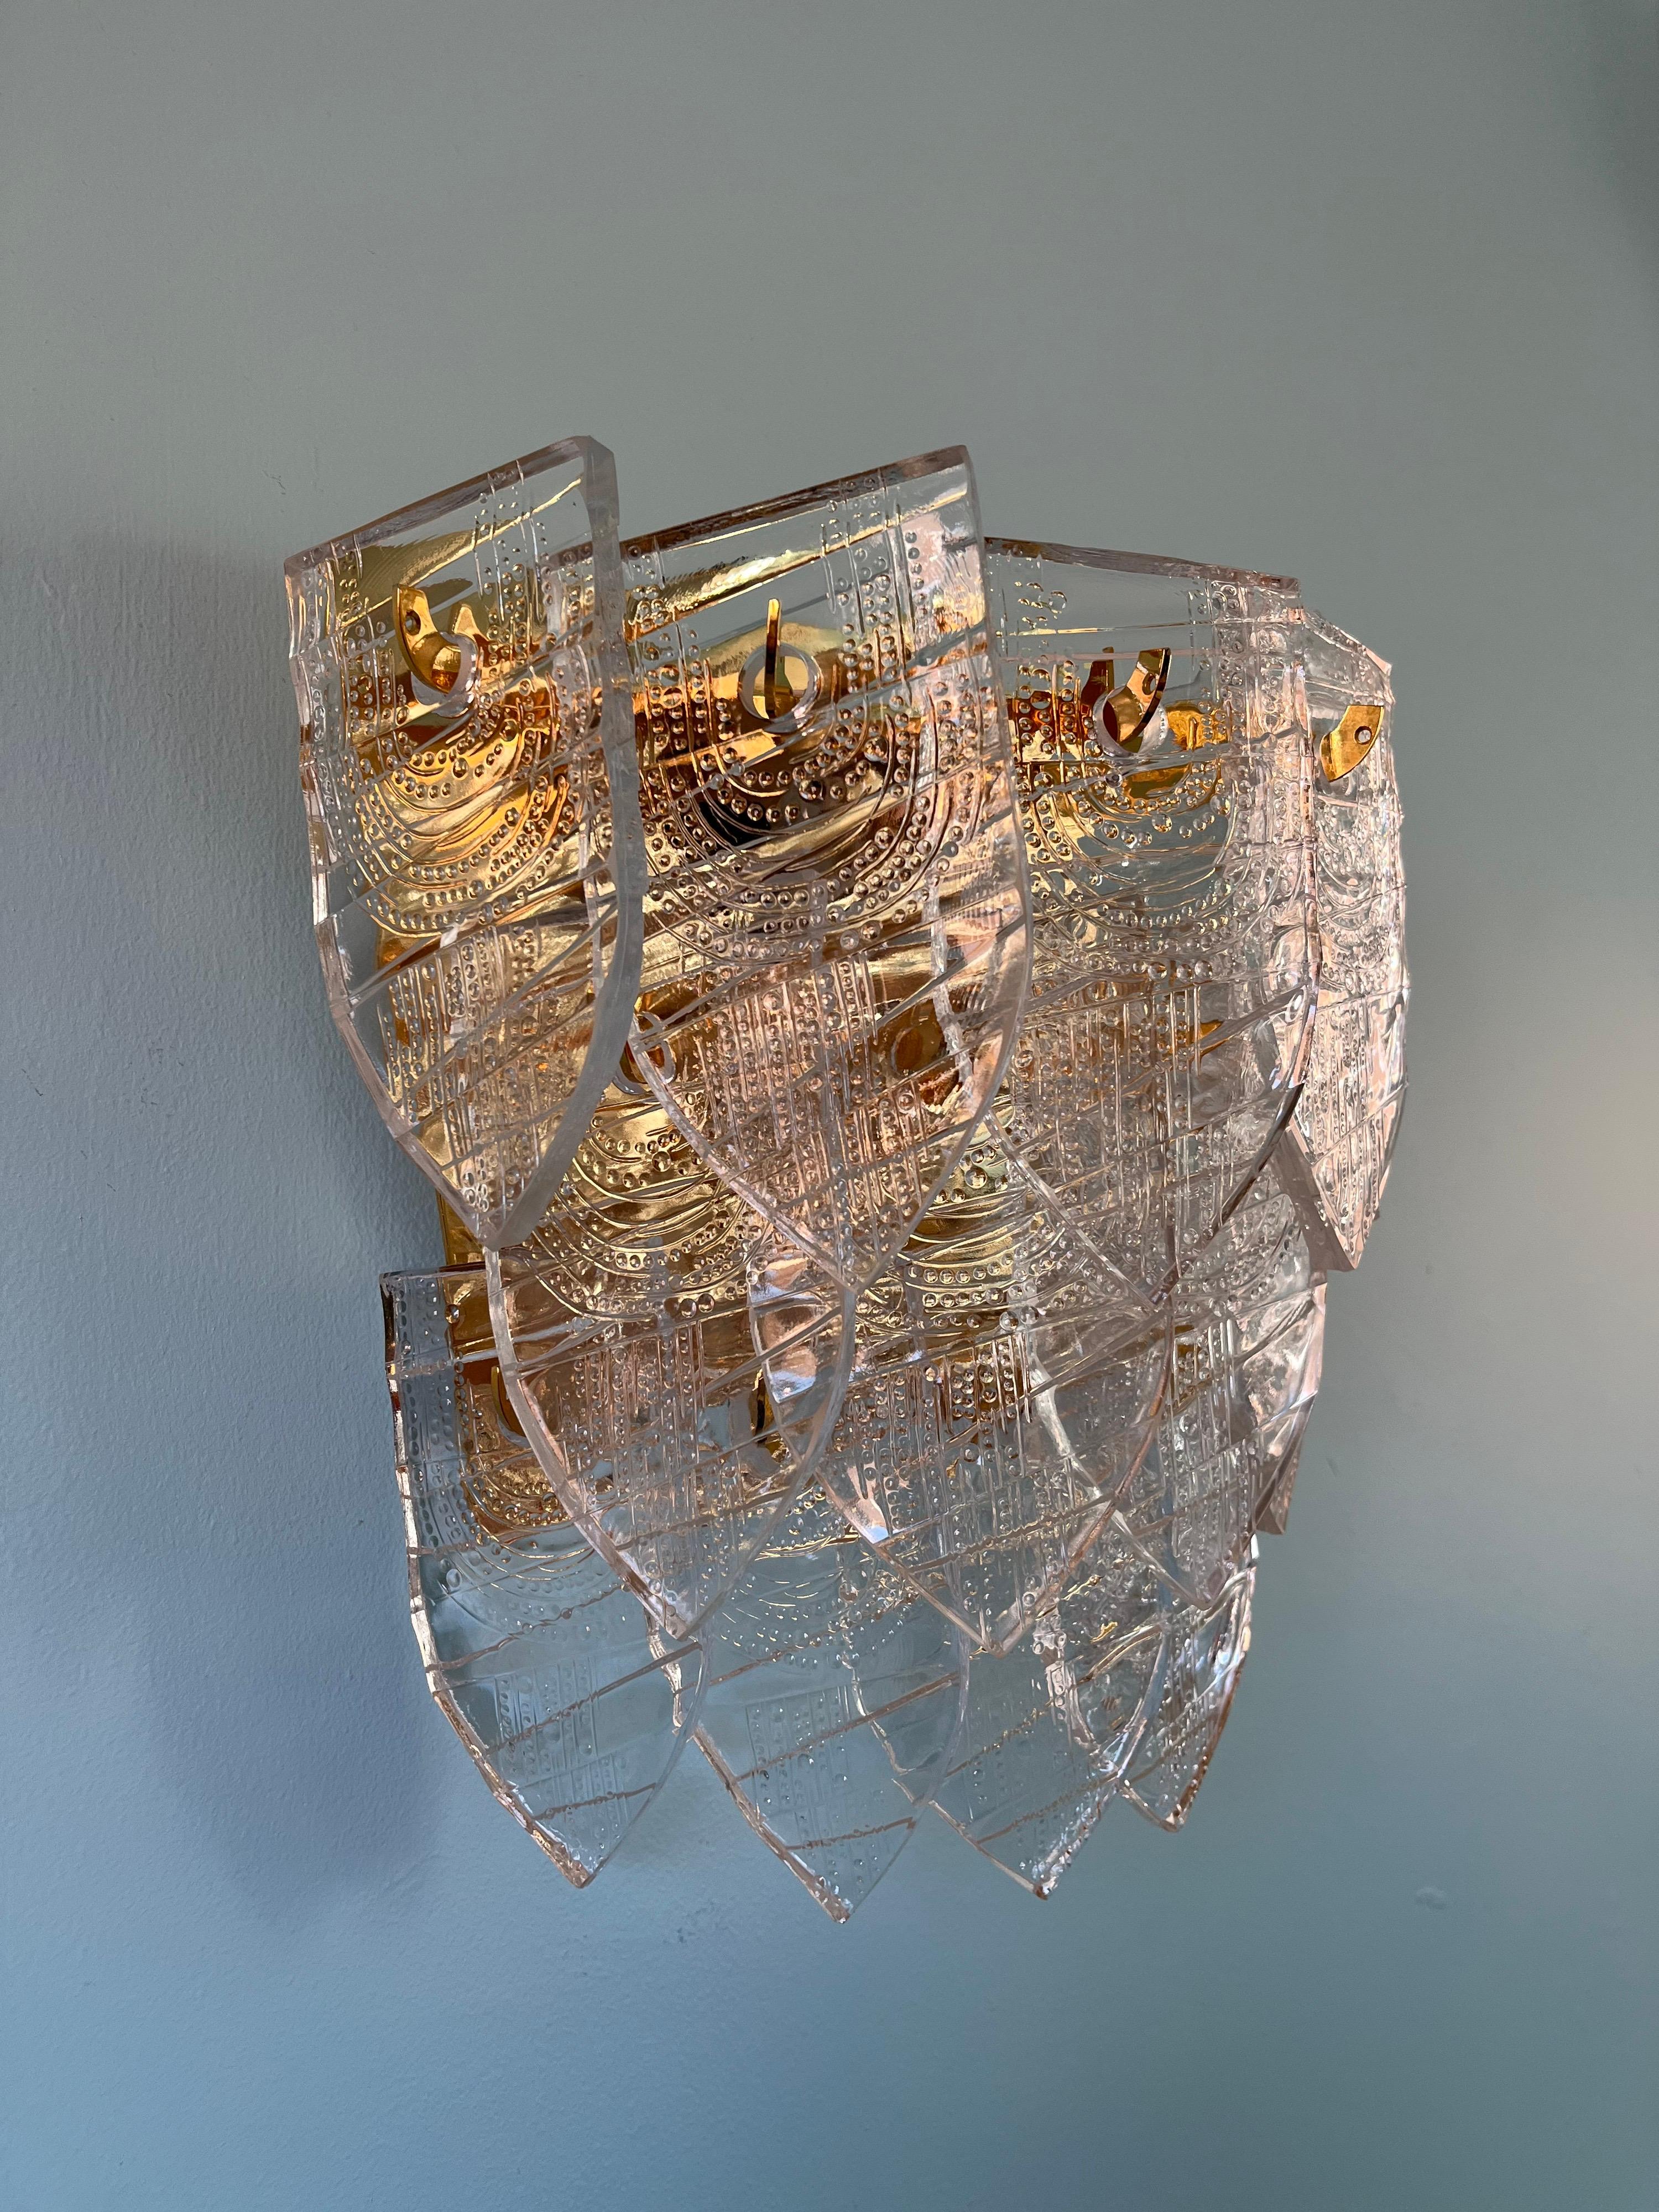 Gunnar Cyren for Orrefors, single gold plated frame holding 17 thick pressed crystal pieces divided on three rows lid up by 3 candelabra bulbs.
The individual pressed crystal pieces has small pattern to them, they were produced by melting crystal